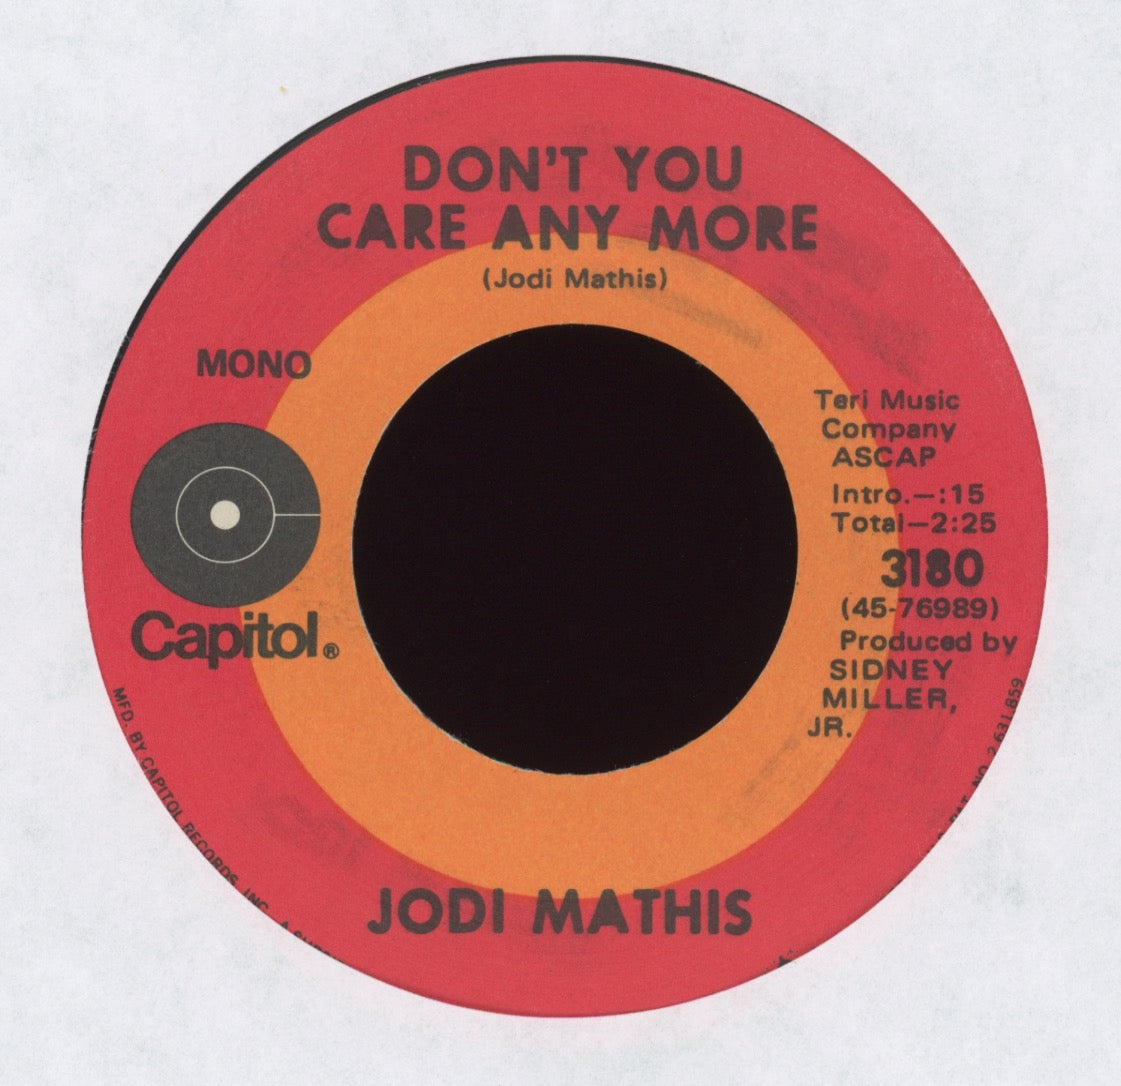 Jodi Mathis - Don't You Care Anymore on Capitol